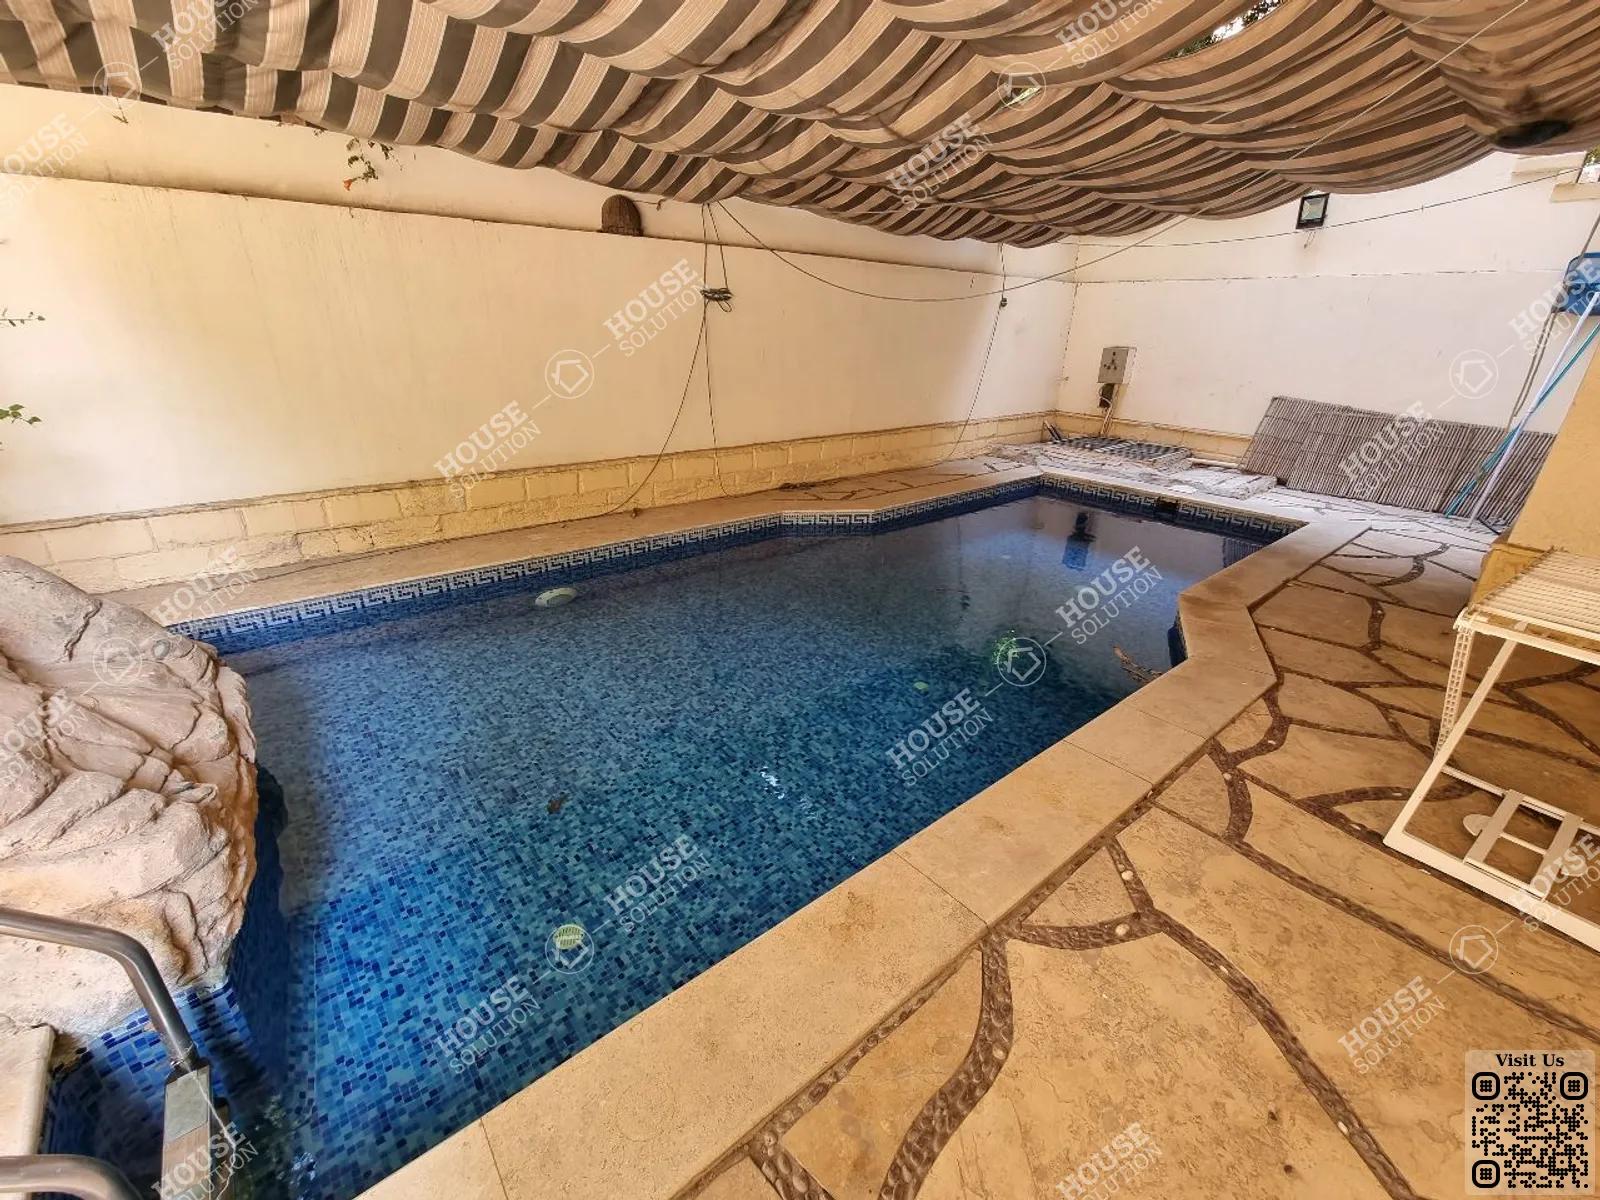 PRIVATE SWIMMING POOL  @ Ground Floors For Rent In Maadi Maadi Sarayat Area: 350 m² consists of 4 Bedrooms 2 Bathrooms Furnished 5 stars #4885-0